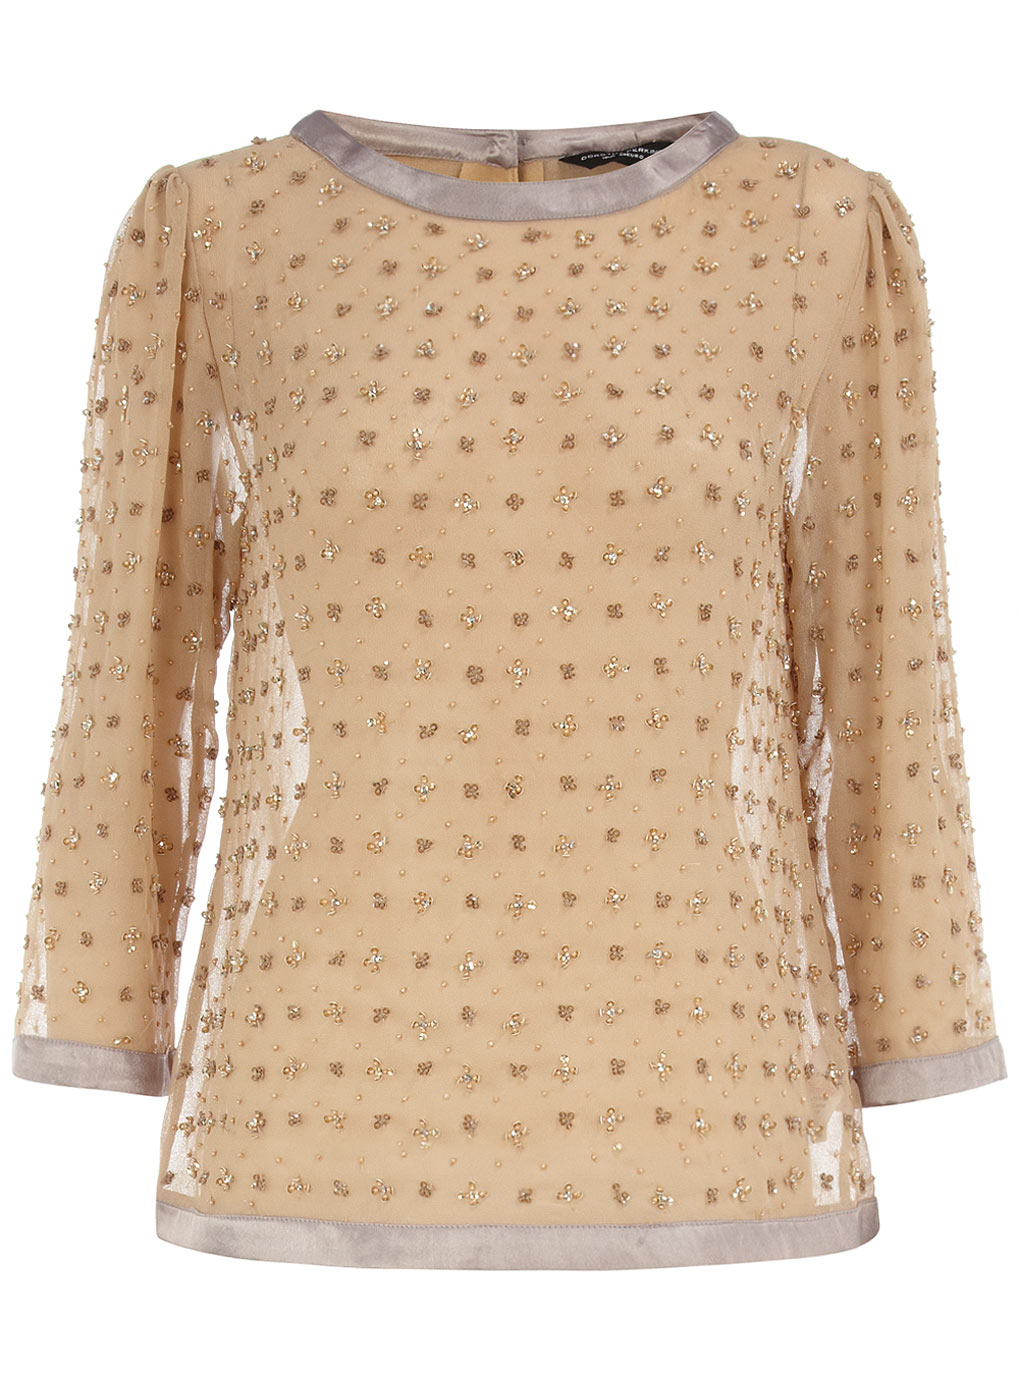 High Street: Dorothy Perkins Embellished Top | South Molton St Style